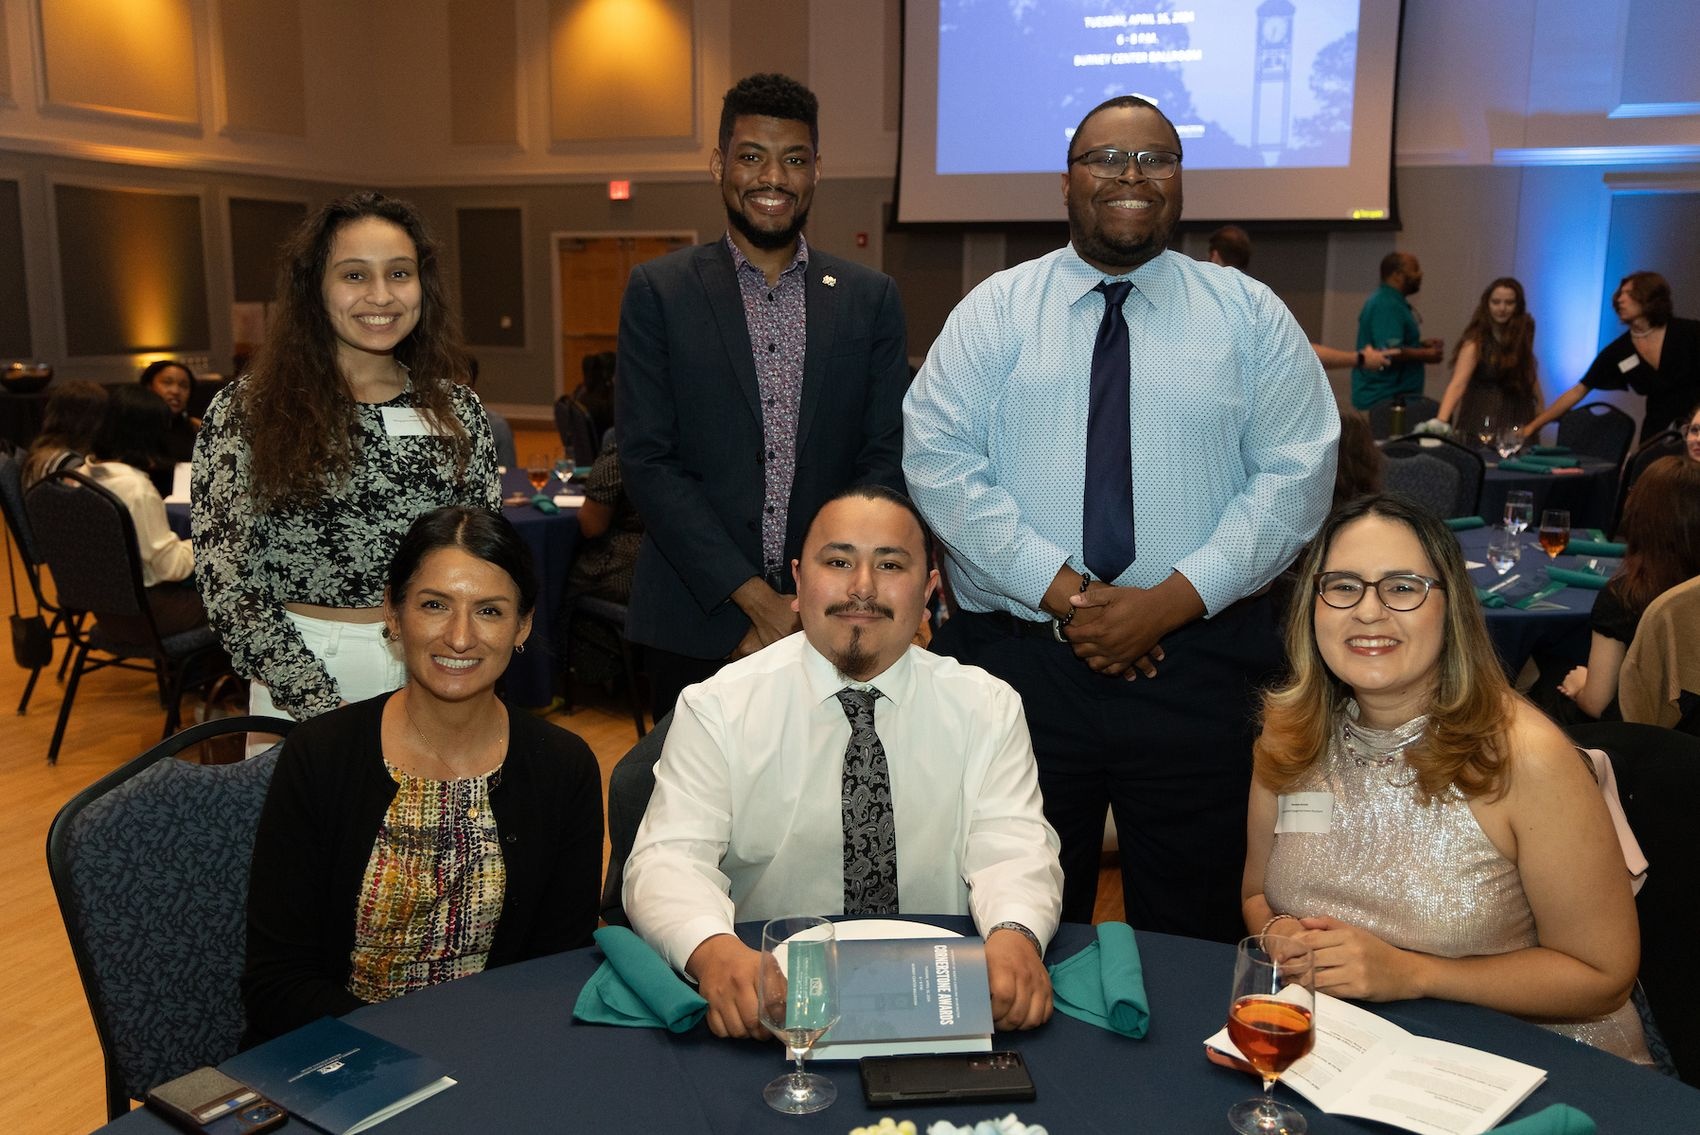 Noemi Meza (second row, far left) a nursing major with a clinical research minor, has been named as a recipient of the UNC Wilmington Cornerstone Award.